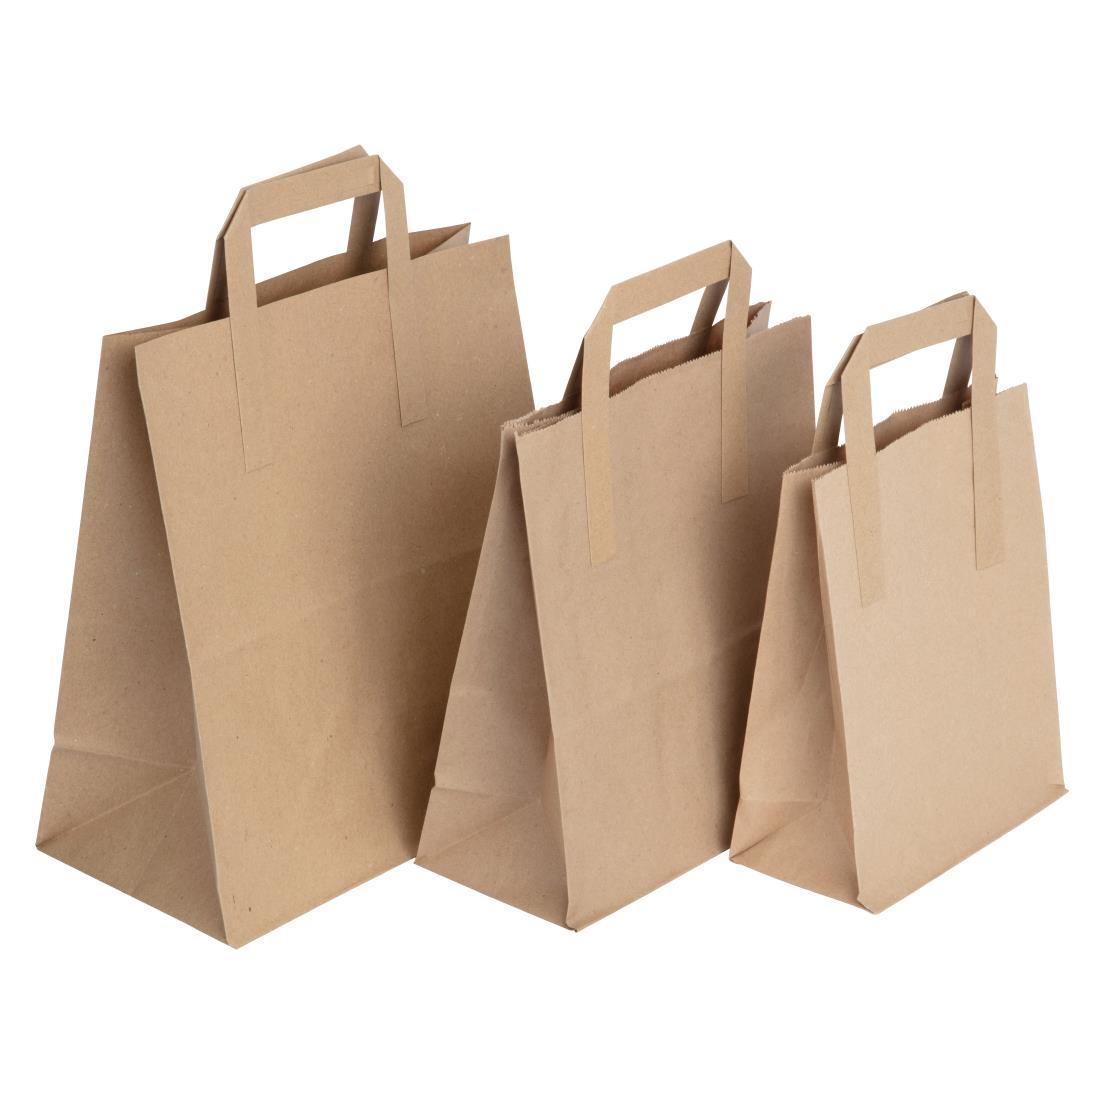 Fiesta Compostable Green Compostable Recycled Brown Paper Carrier Bags Large (Pack of 250) - CF592  - 5